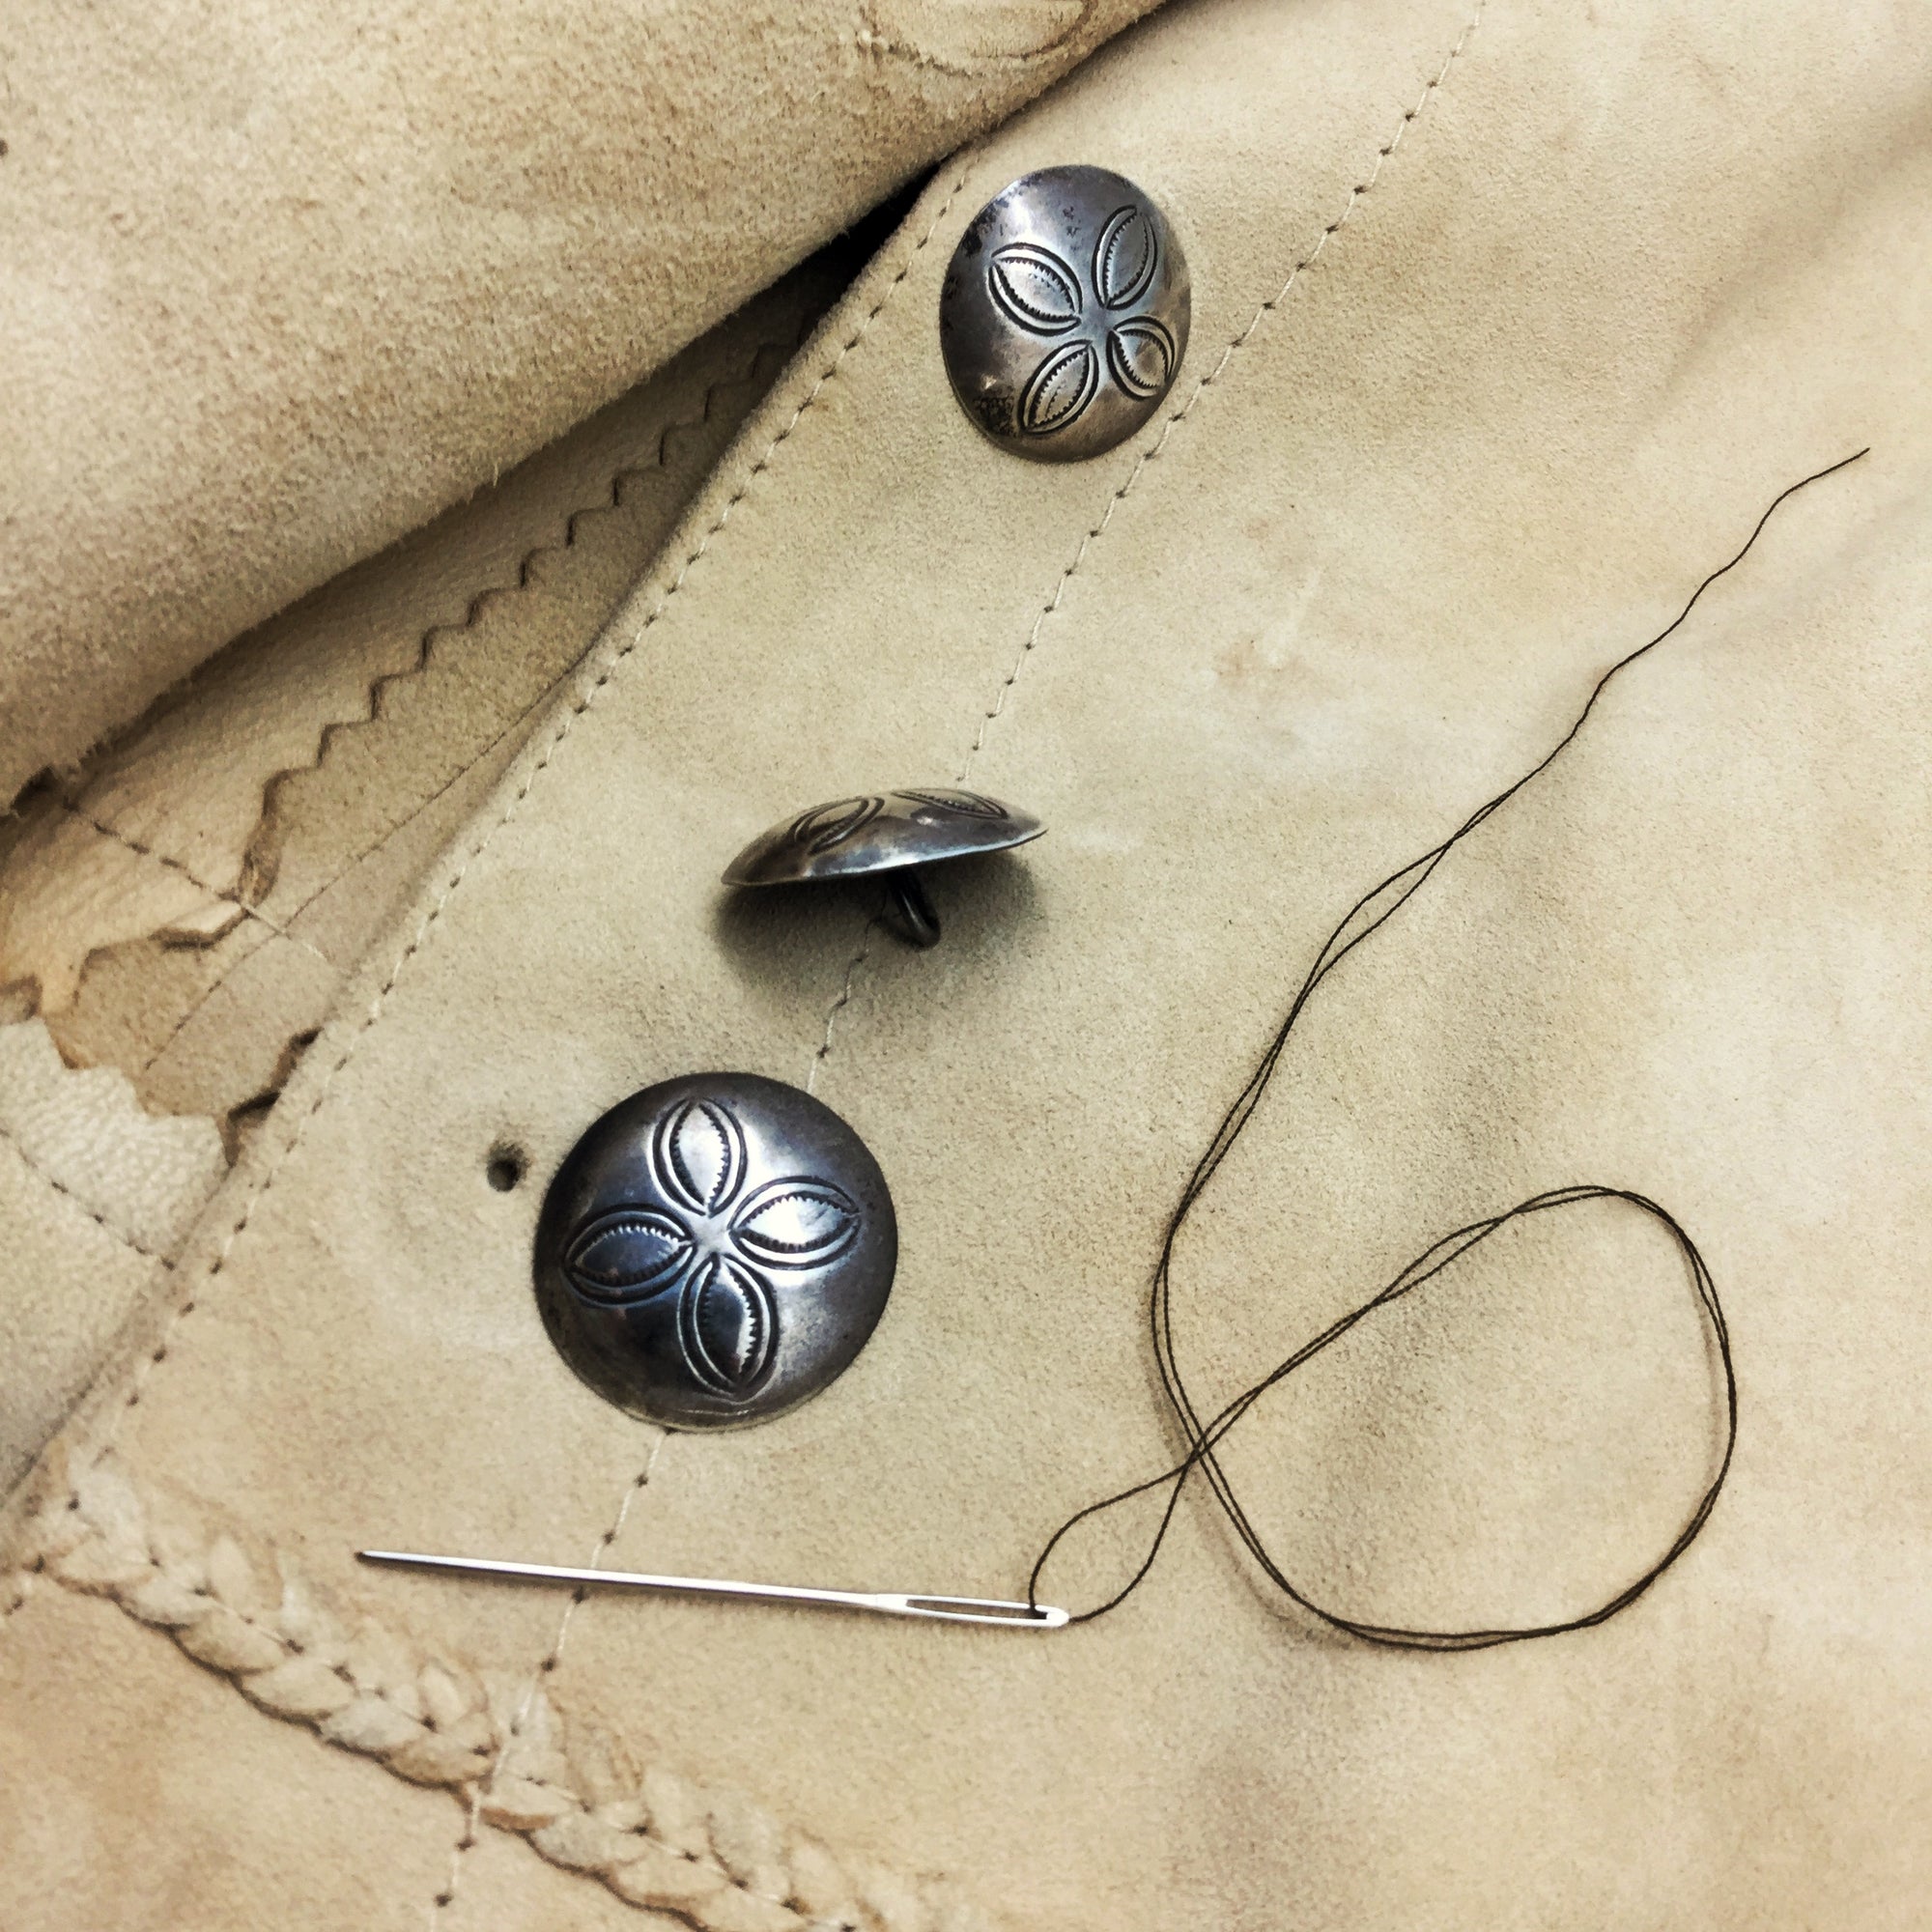 How to Restore Water Damaged Leather & Suede